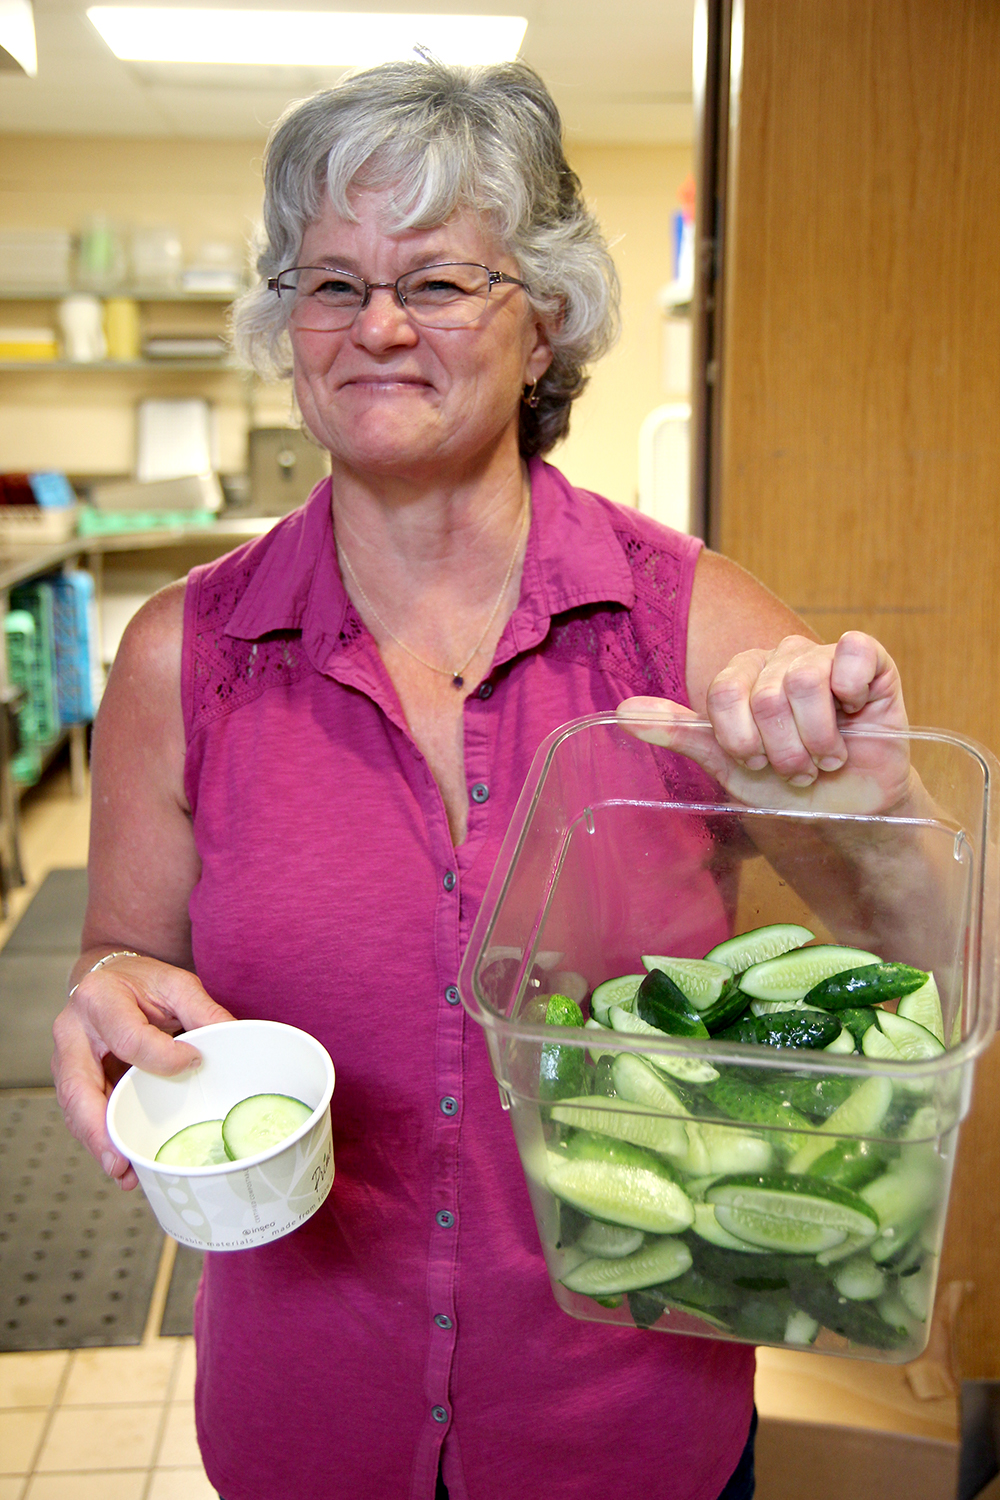 Deb from Nay Ah Shing school with the cucumbers